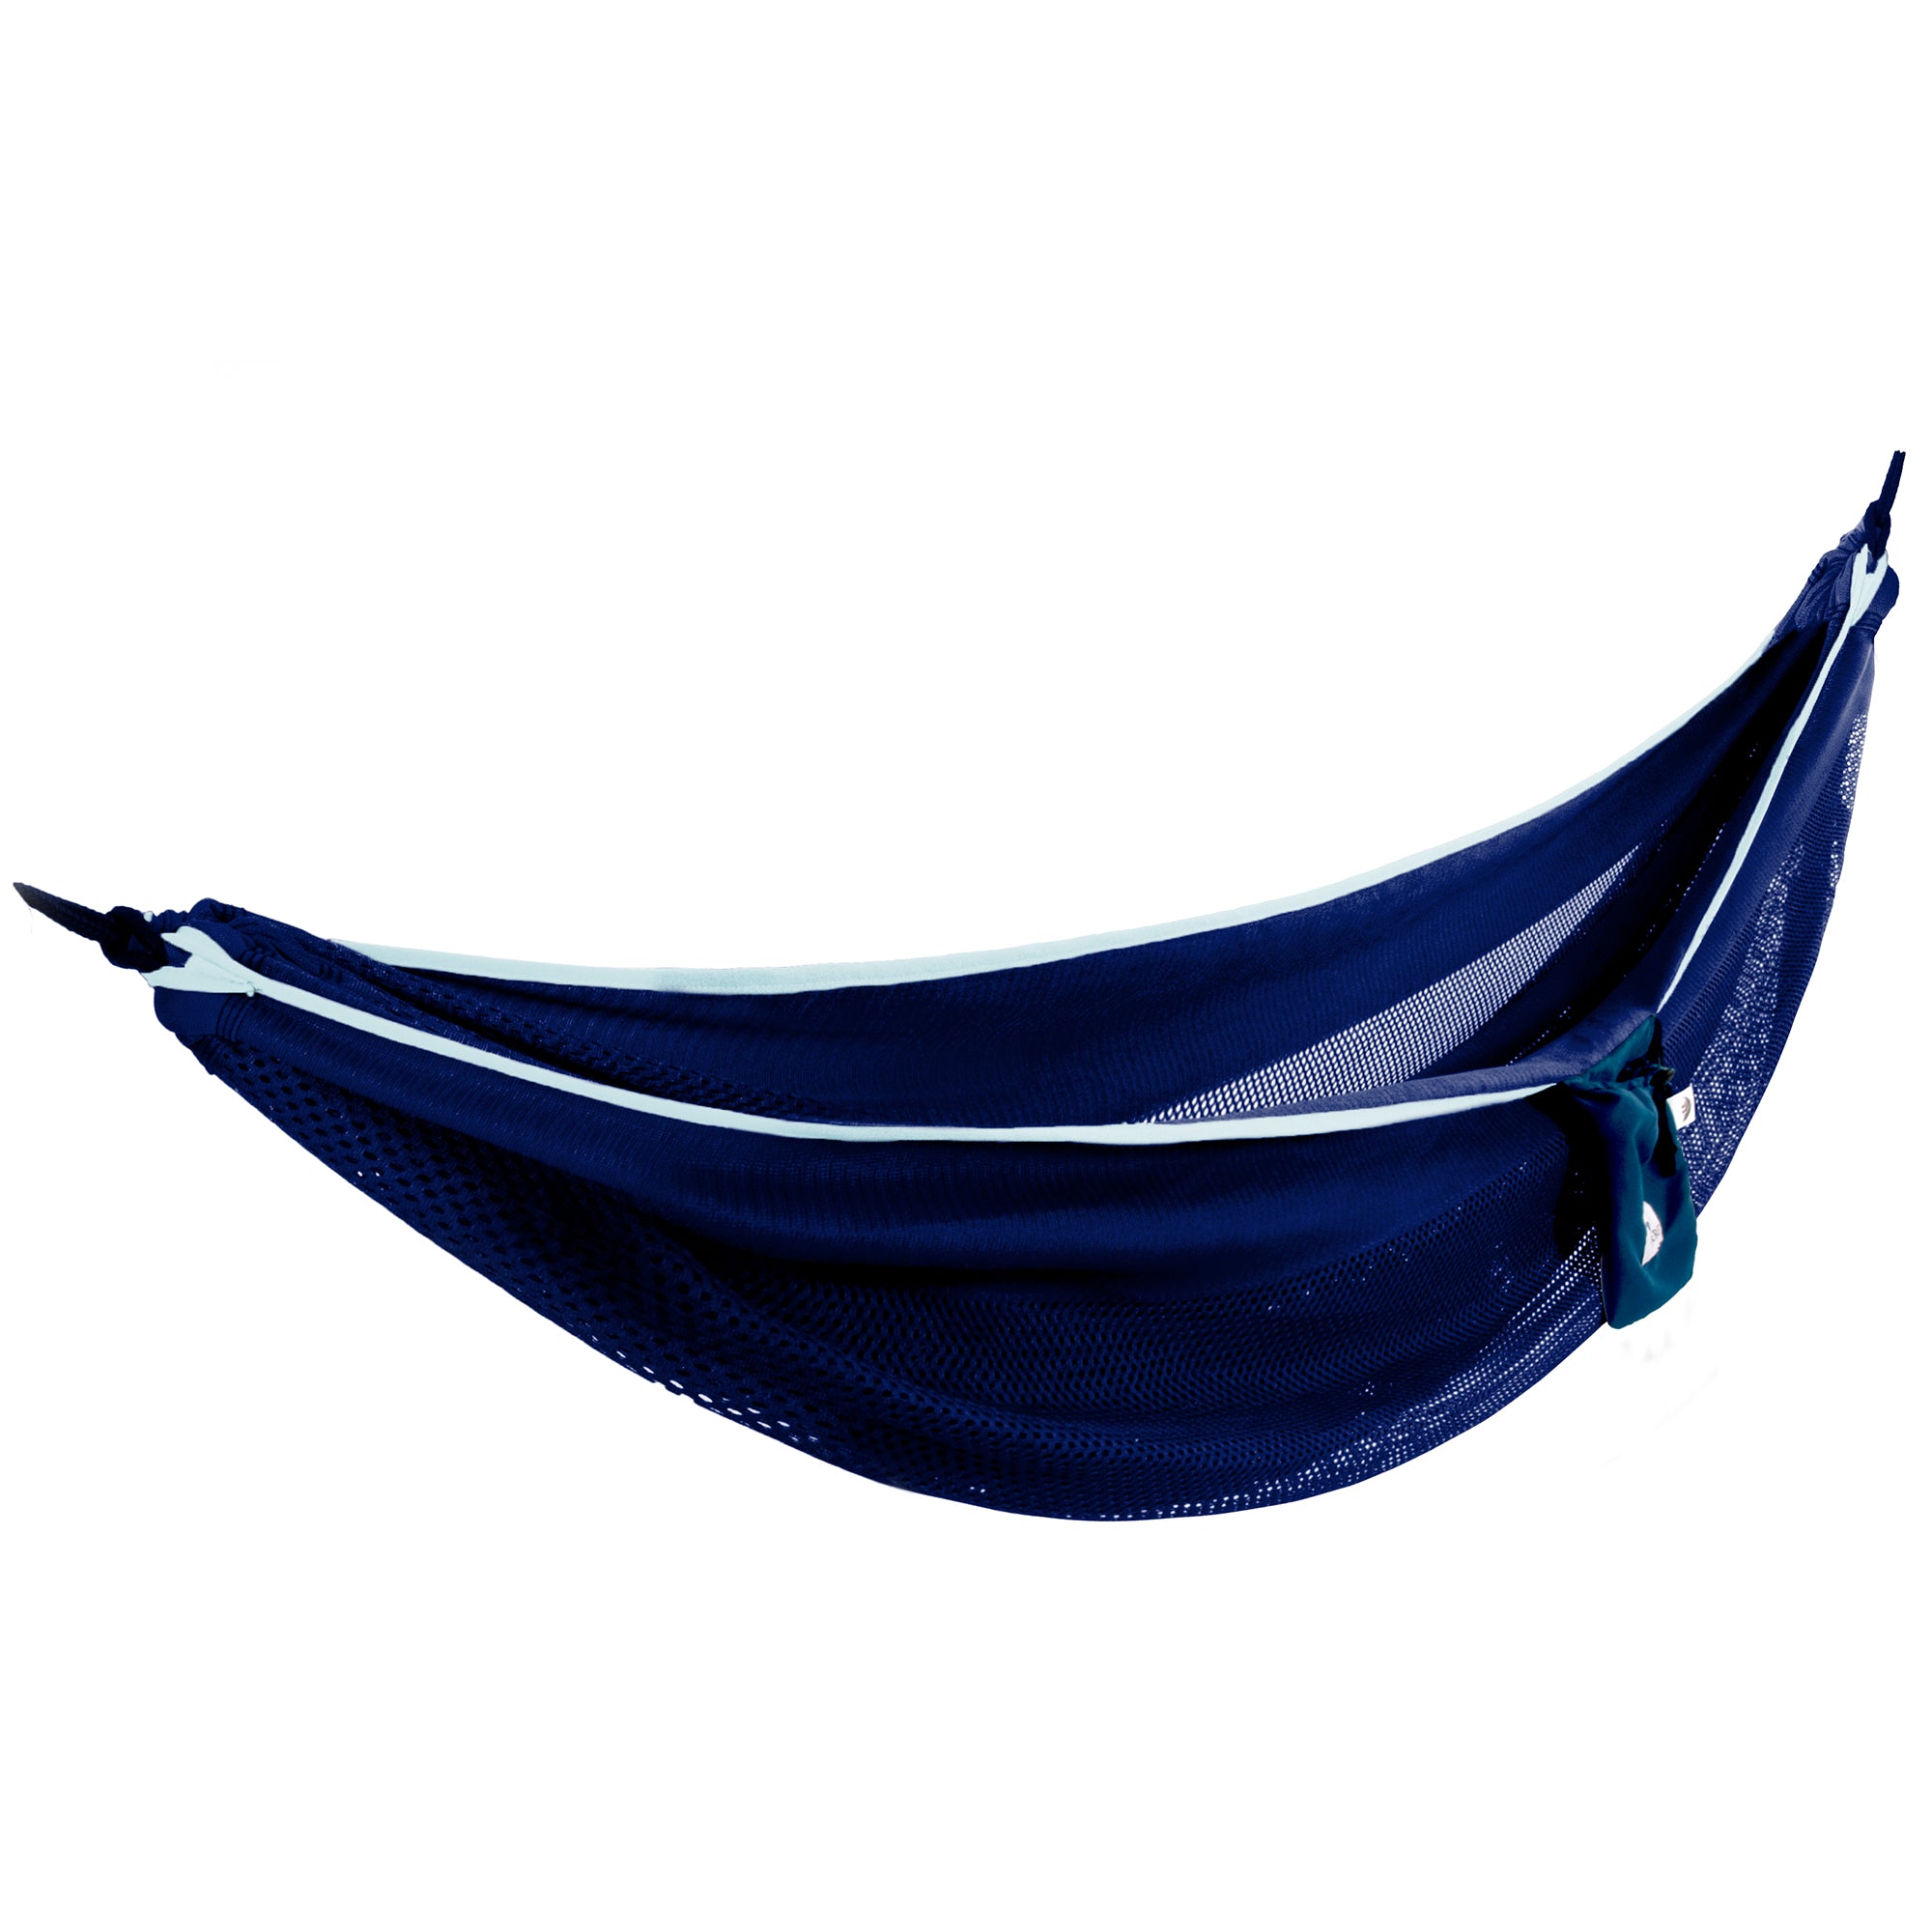 Mesh Polyester Hammock - Double Navy/Turquoise